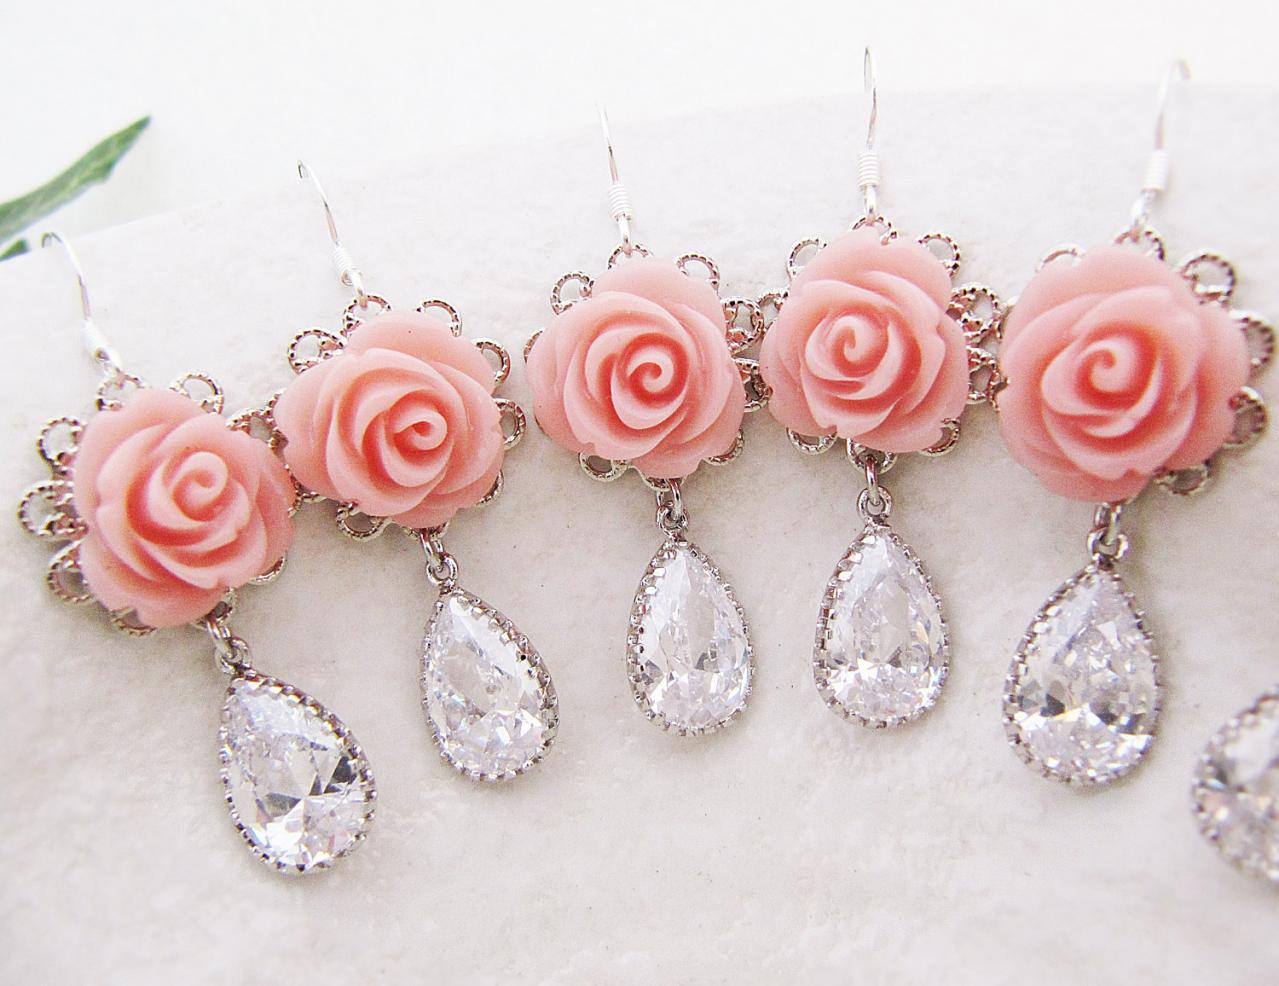 Wedding Jewelry Bridesmaid Gifts Bridal Earrings Bridesmaid Earrings Rose Flower Cabochon With Cubic Zirconia Tear Drops 16 Colors To Choose